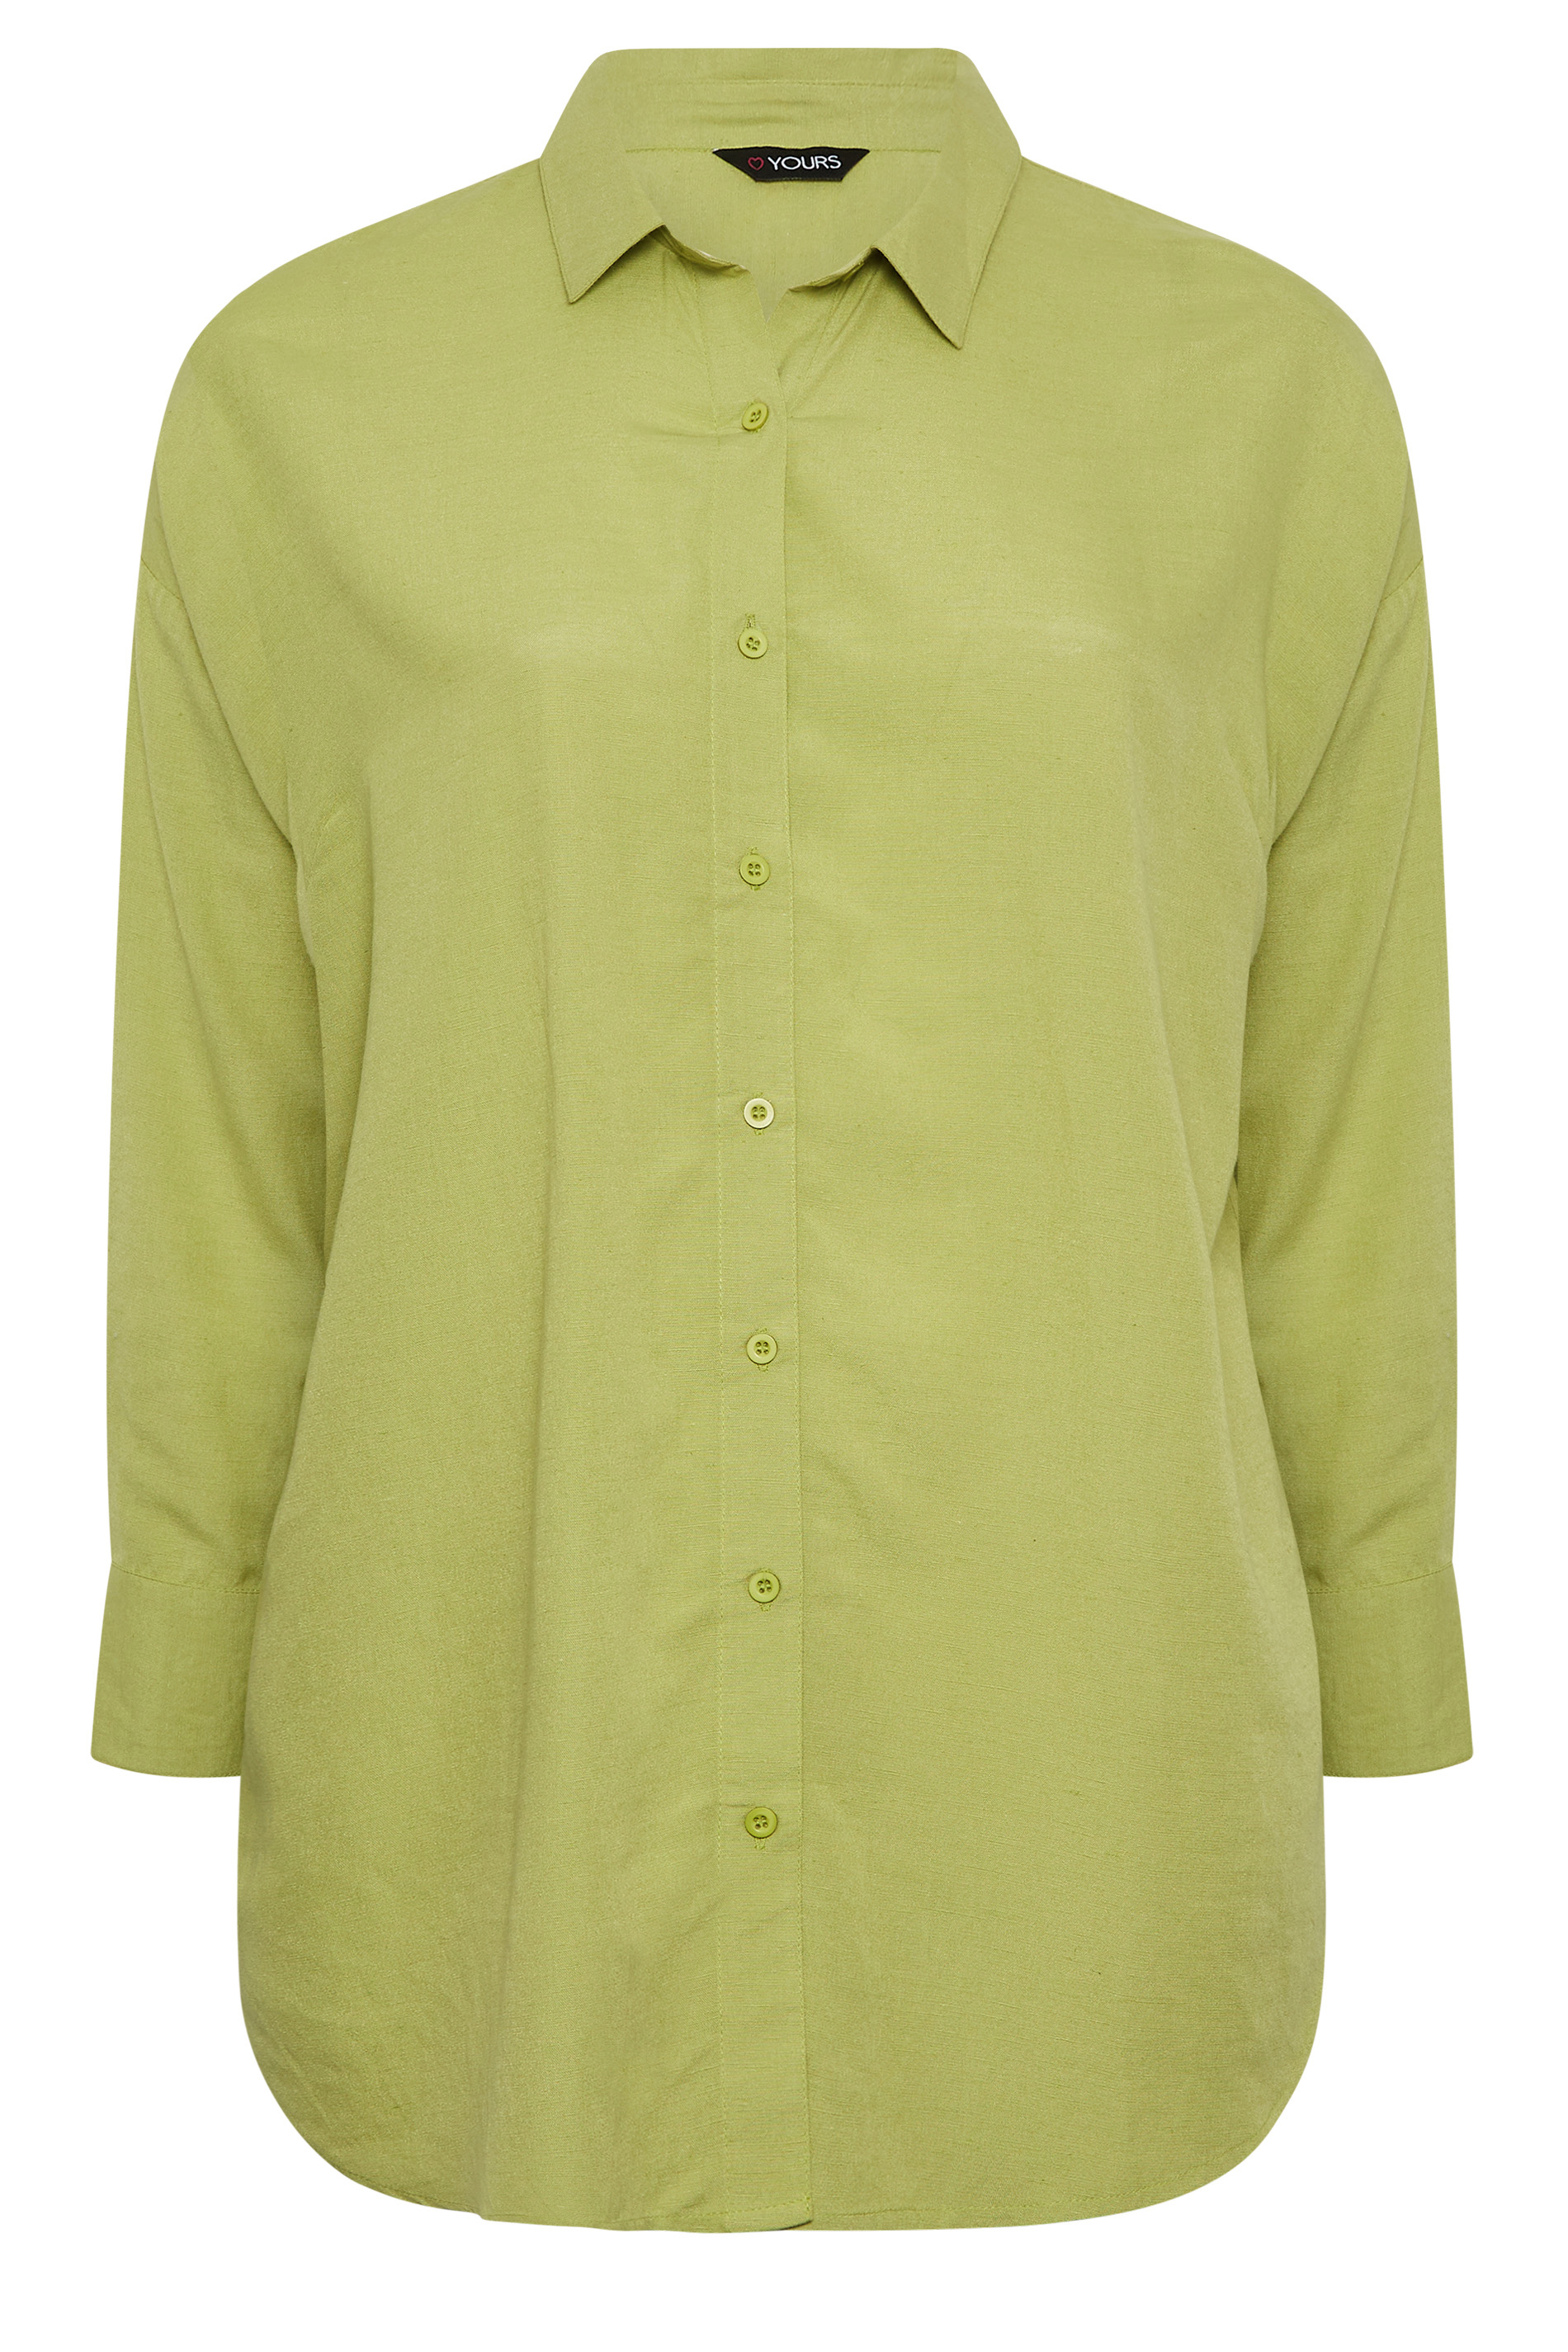 YOURS Plus Size Green Linen Look Shirt | Yours Clothing